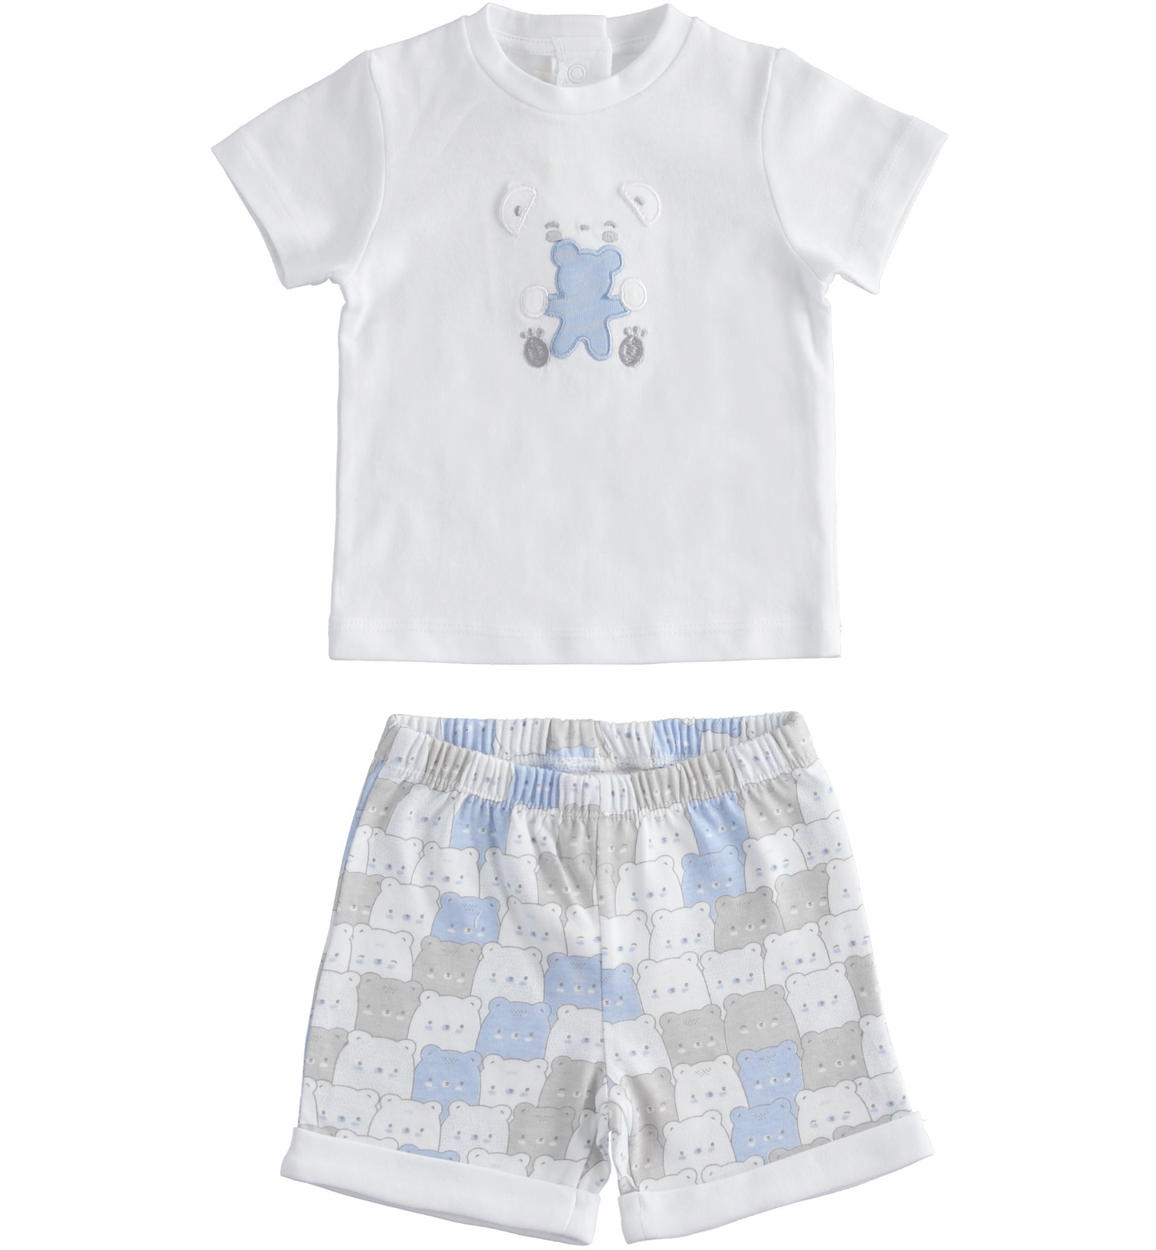 12-18 months New 100% Organic Cotton Outfit - T-shirt and Shorts 